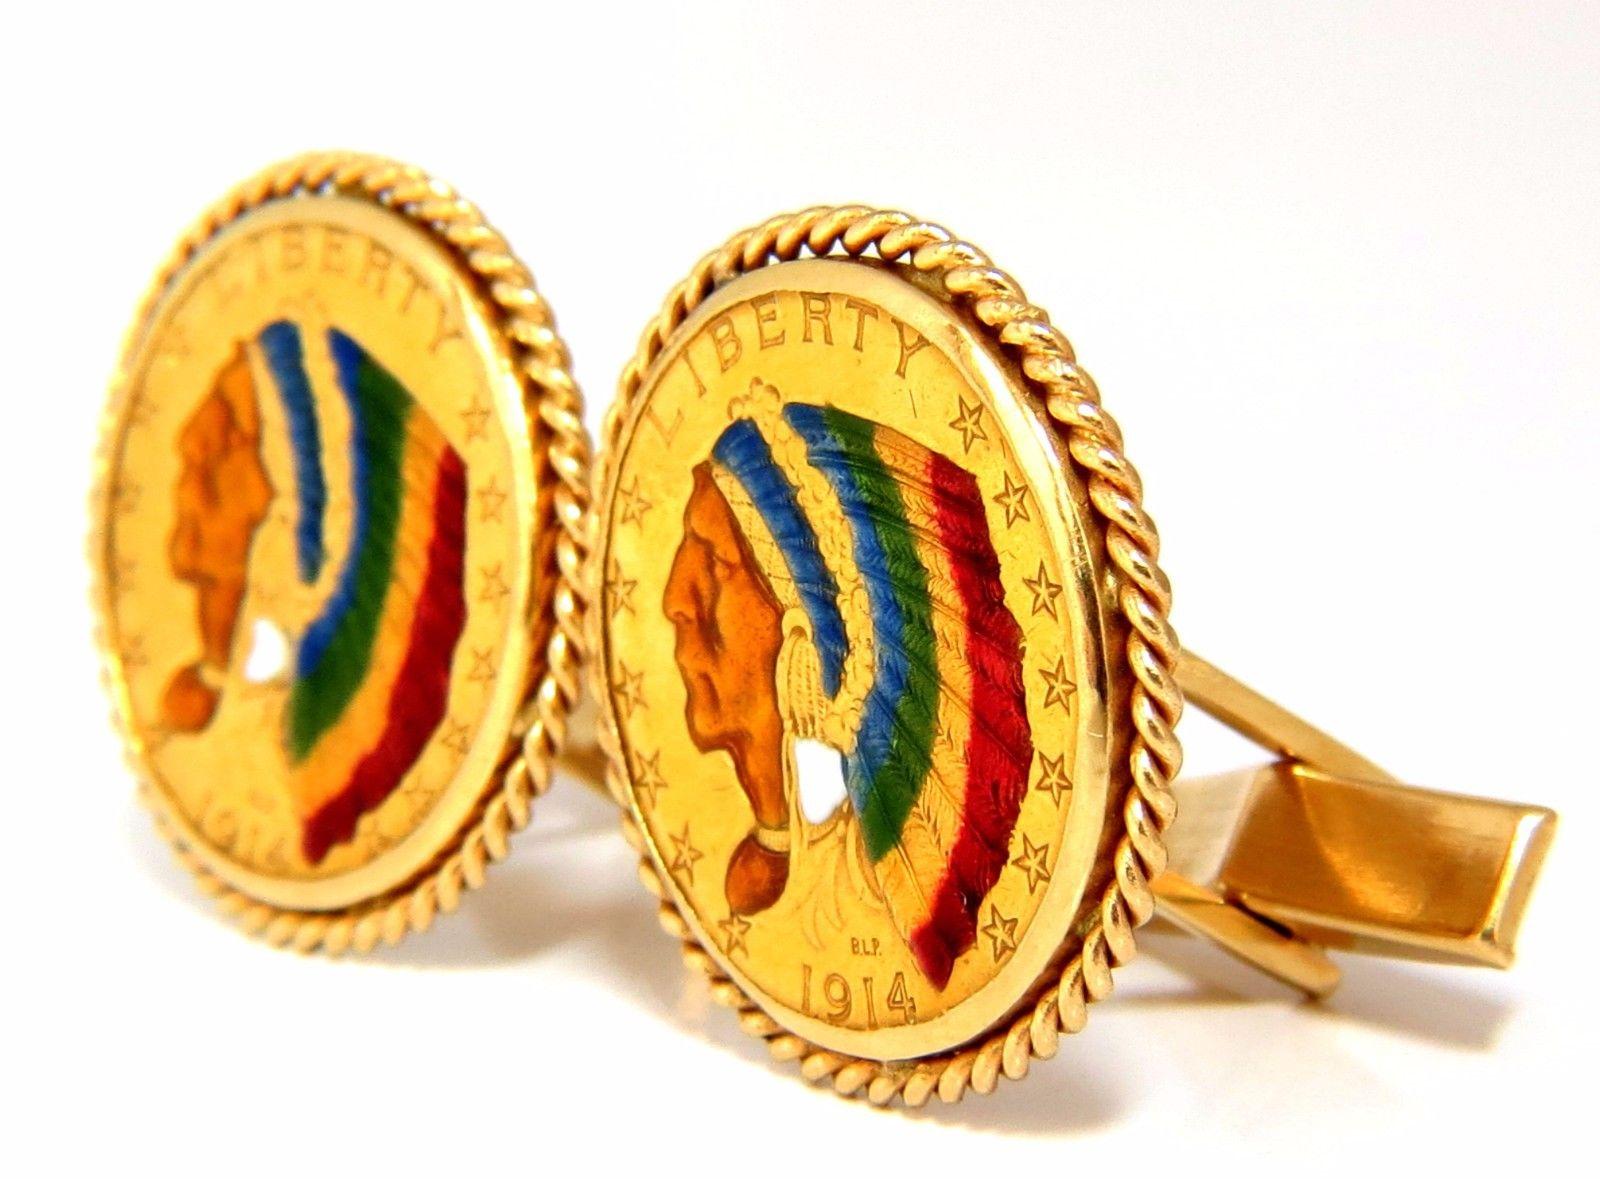 Original Statement.

(2) 1914 BLP Fine Liberty gold coins.

Colored in enamel finish,

18kt. gold frame casing & 14kt french cufflink.

Gorgeous rope / barley twist frame.

27.7 grams 

durable and solid